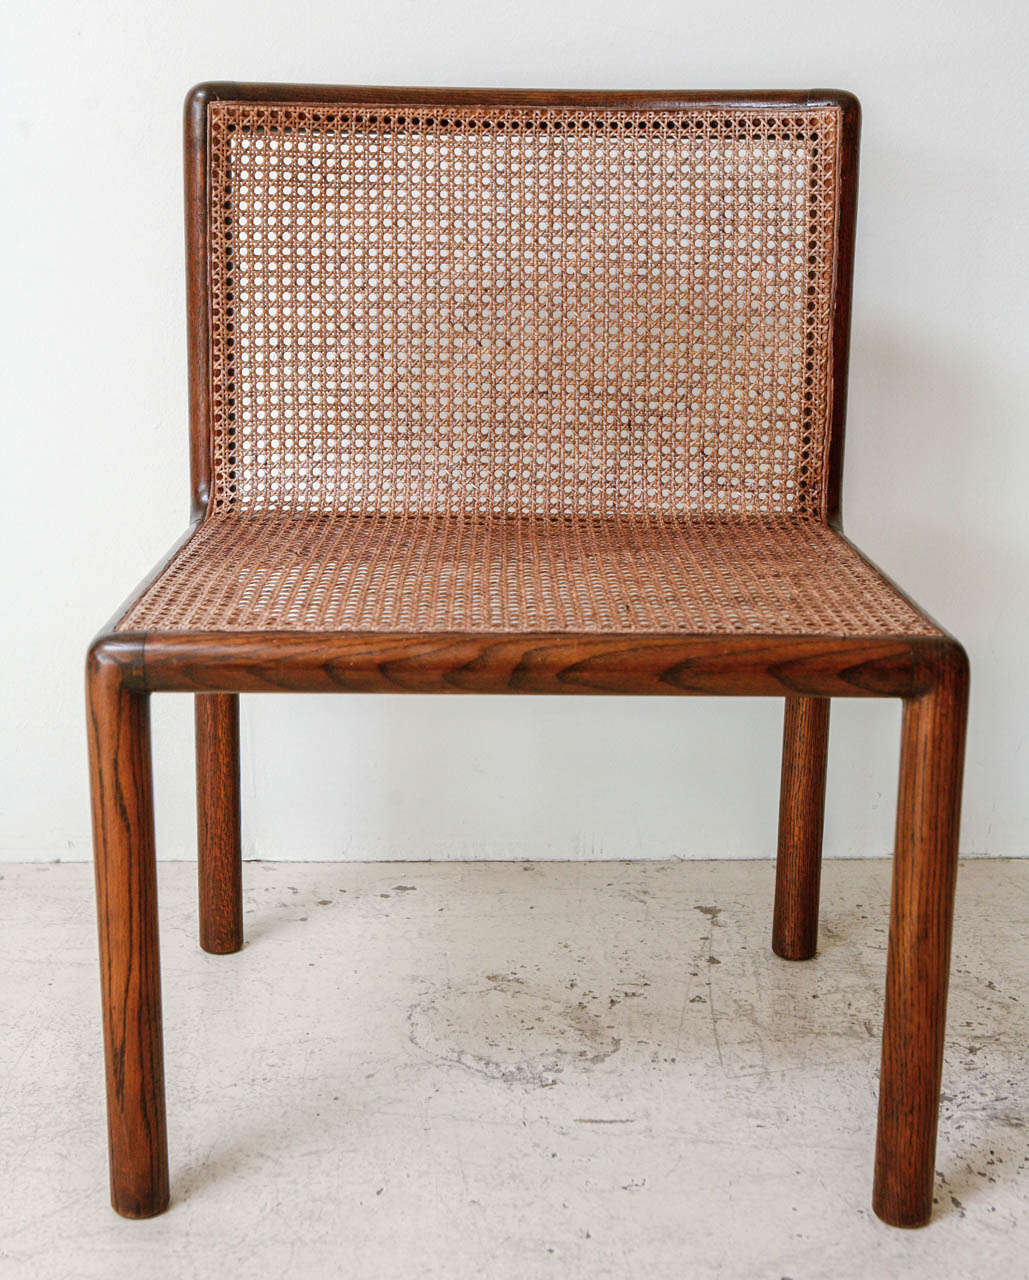 Stained Caned Chairs Designed by Noted Architect Phillip Enfield